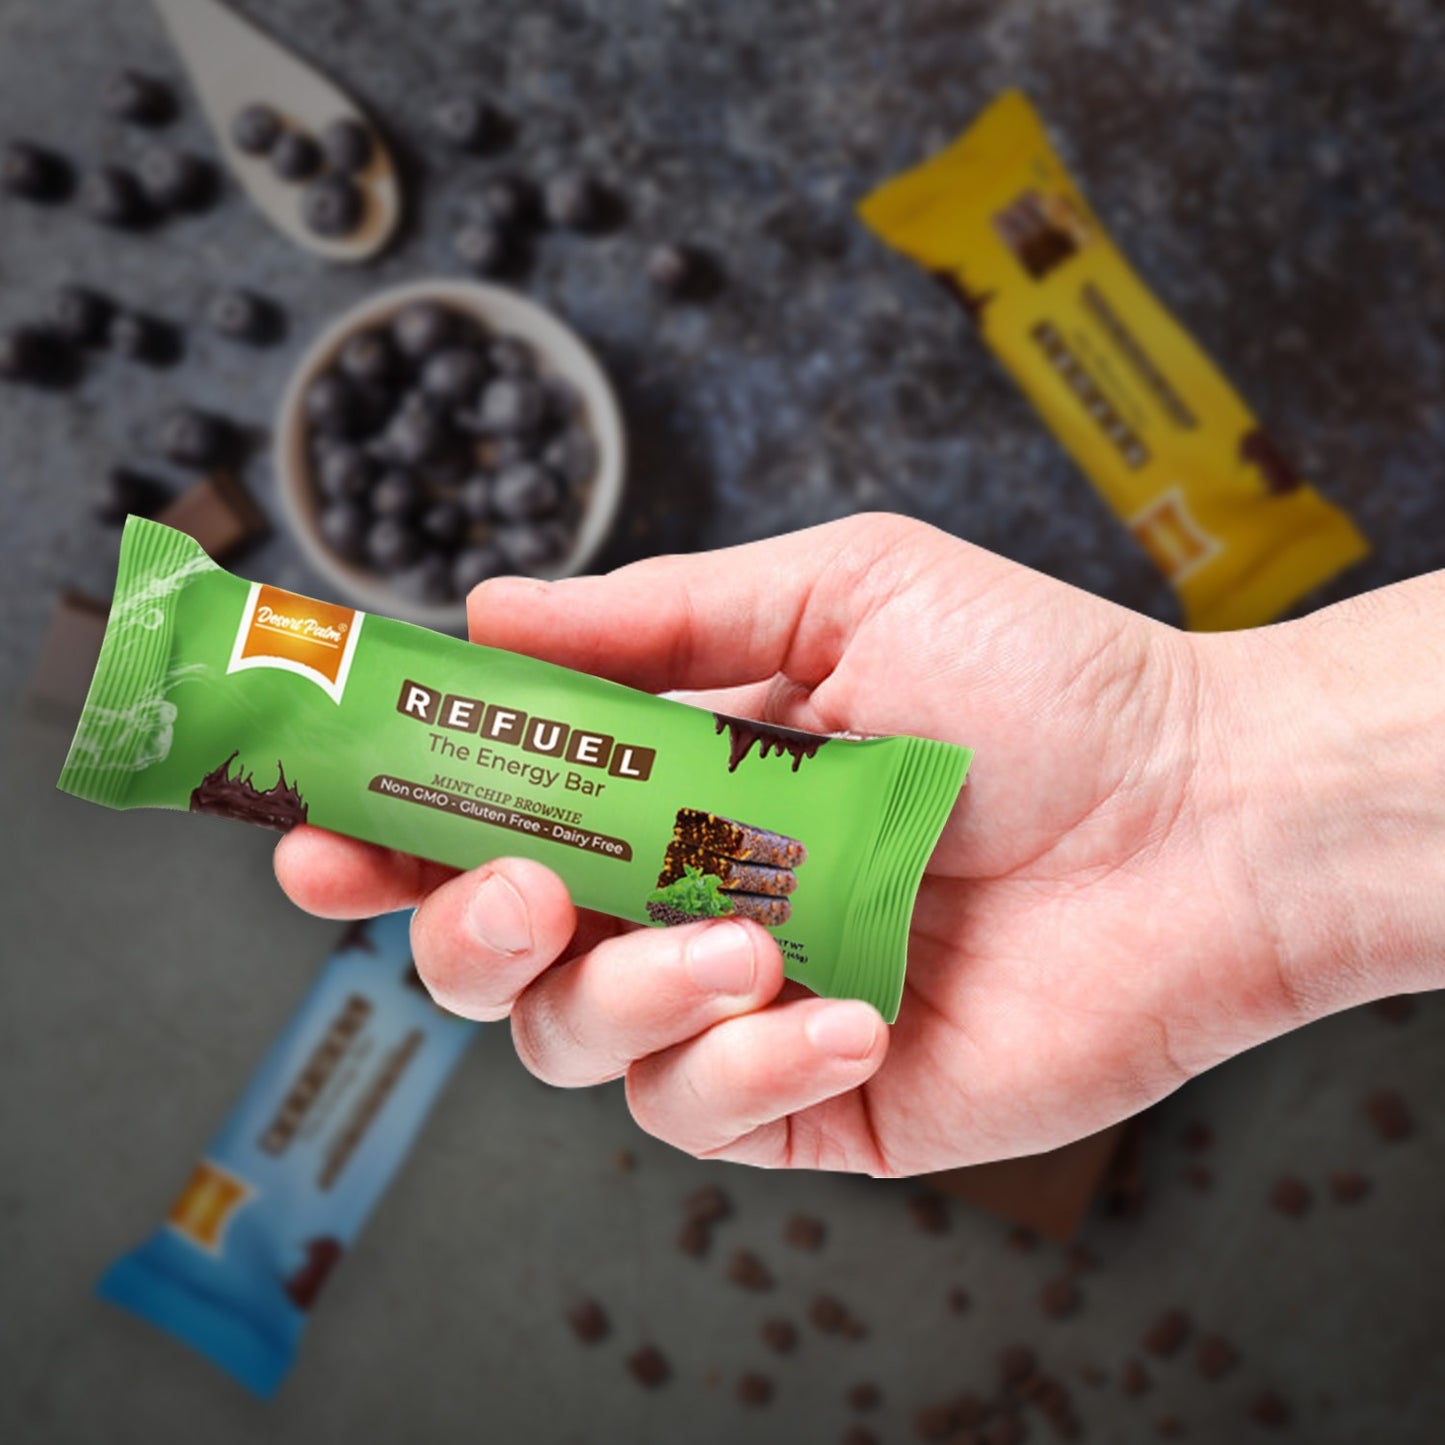 Desert Palm Refuel Mint Chip Brownie Fruit & Nuts Bar with Extra Nuts - Gluten-free, Dairy-free, Vegan Snack Bar with 100% Natural Ingredients & No Added Preservatives - 10 Count